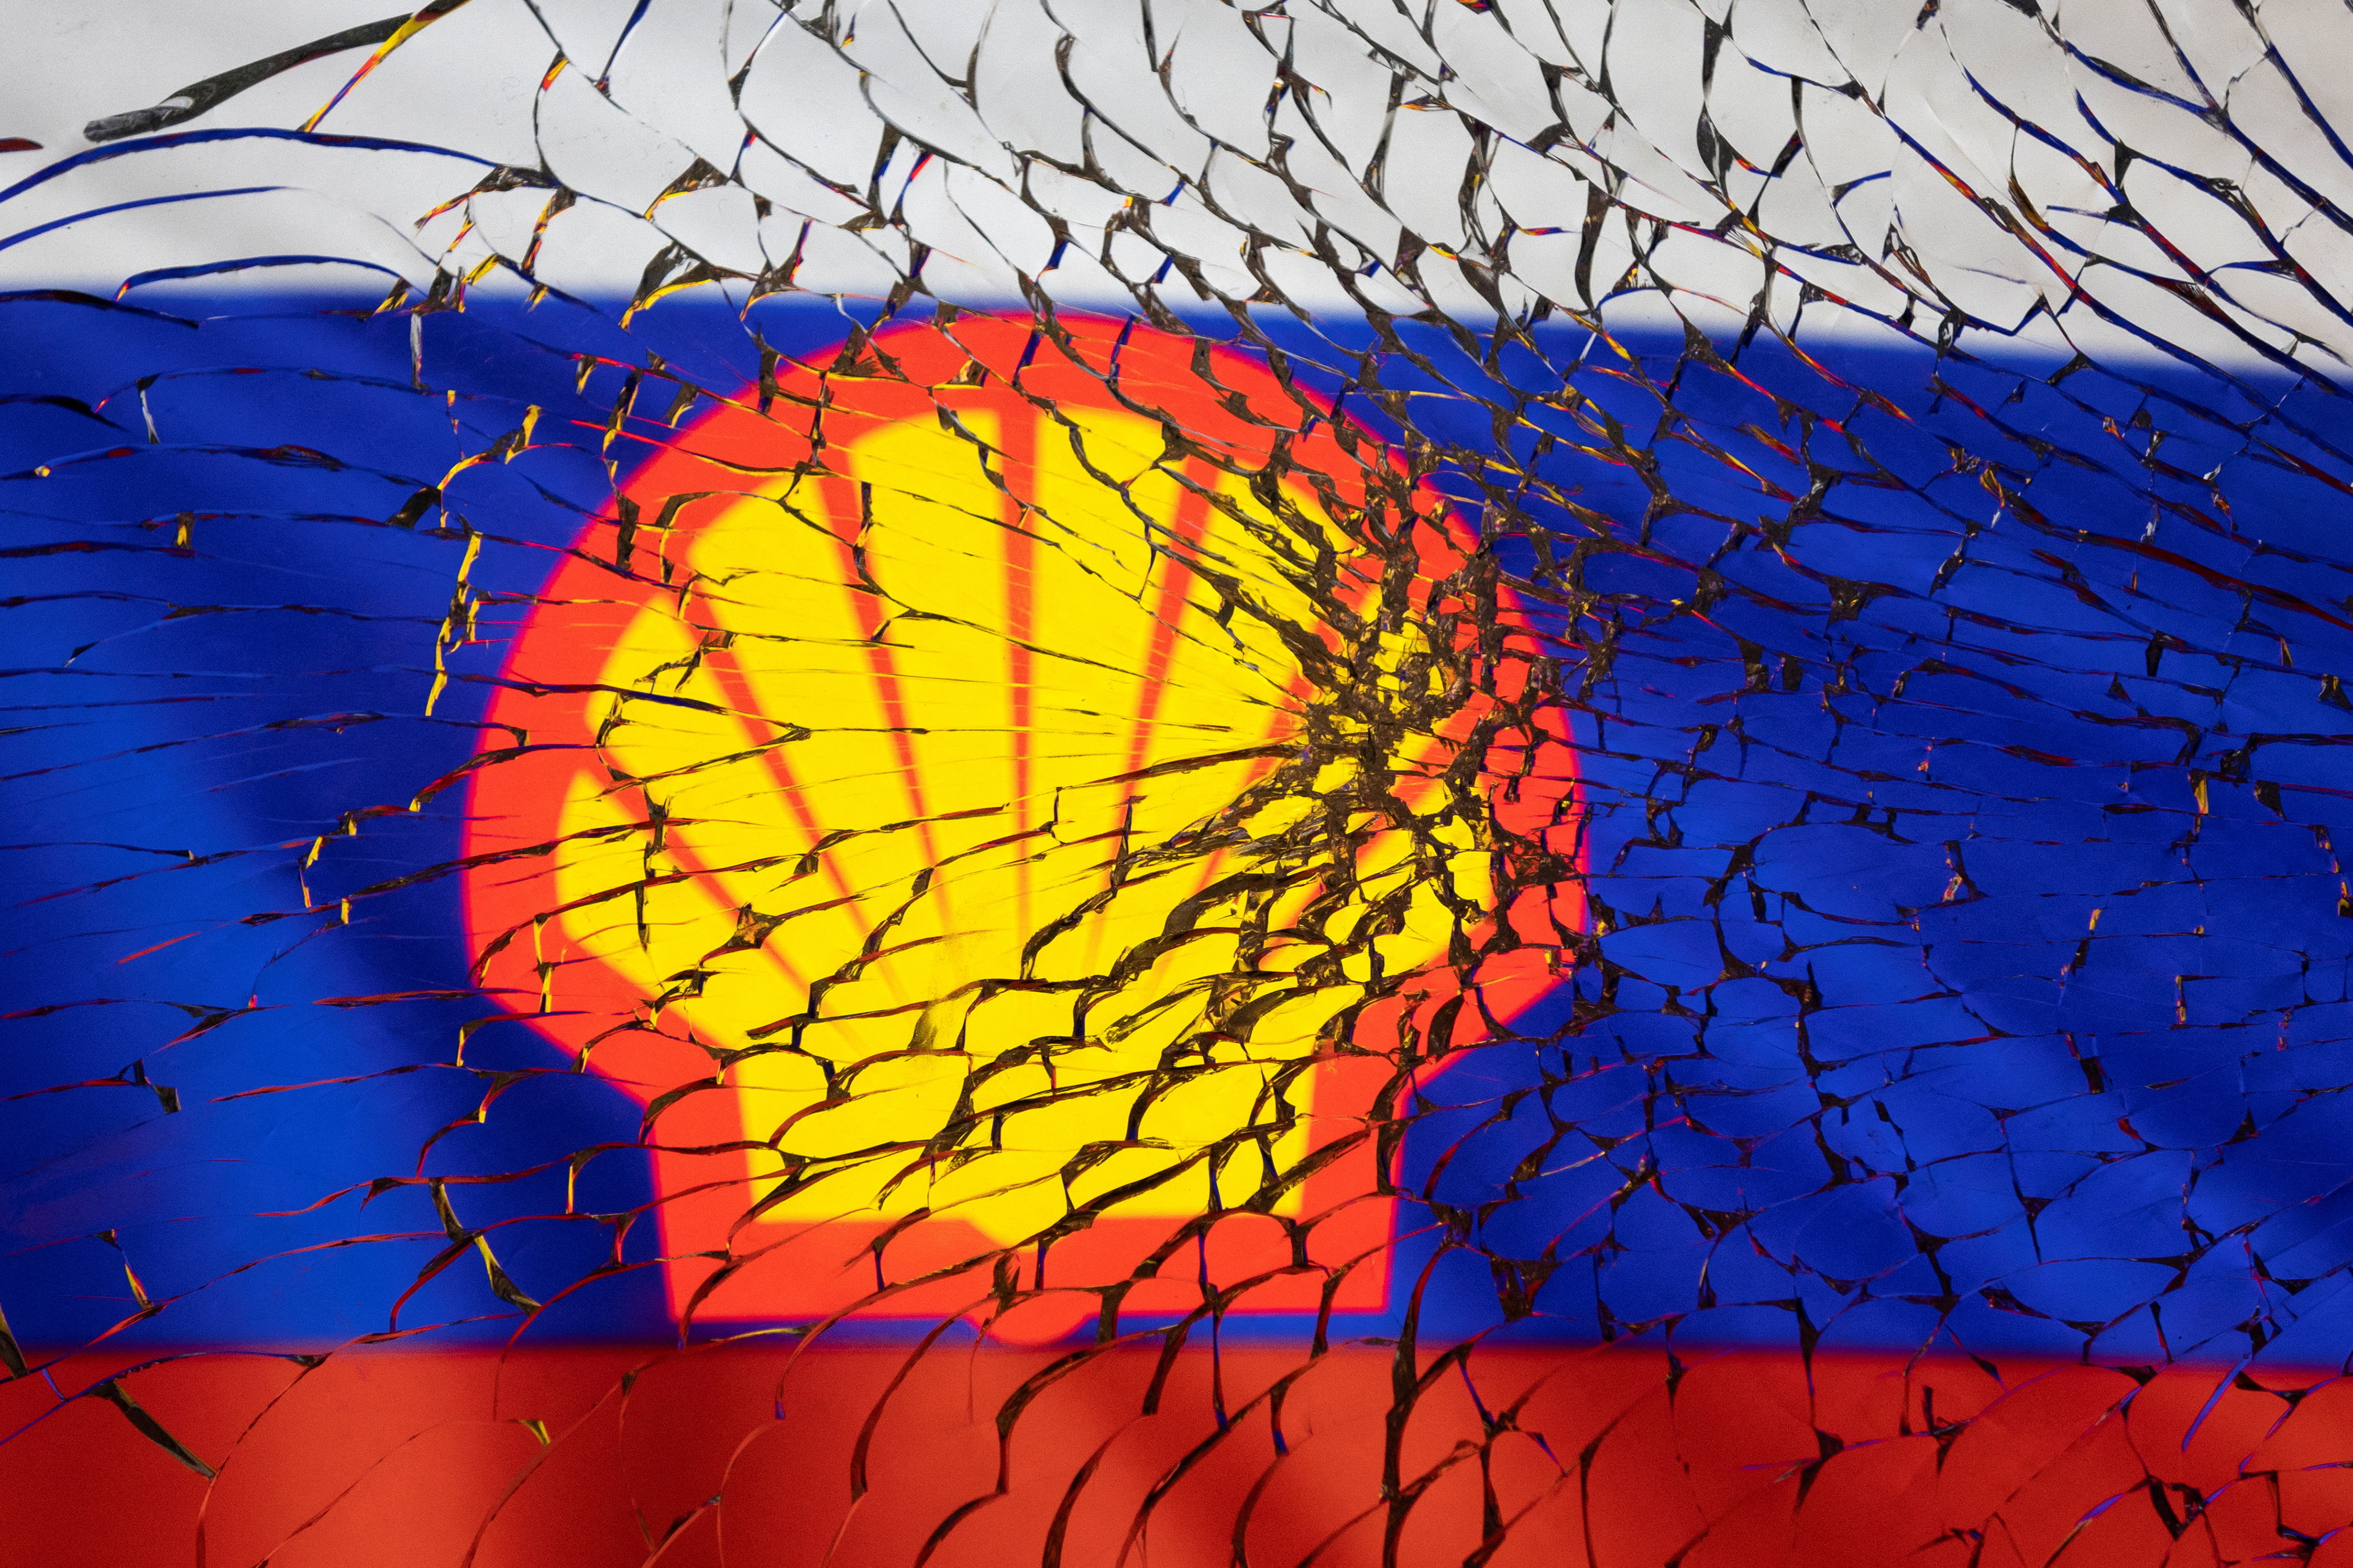 Illustration shows Shell logo and Russian flag through broken glass